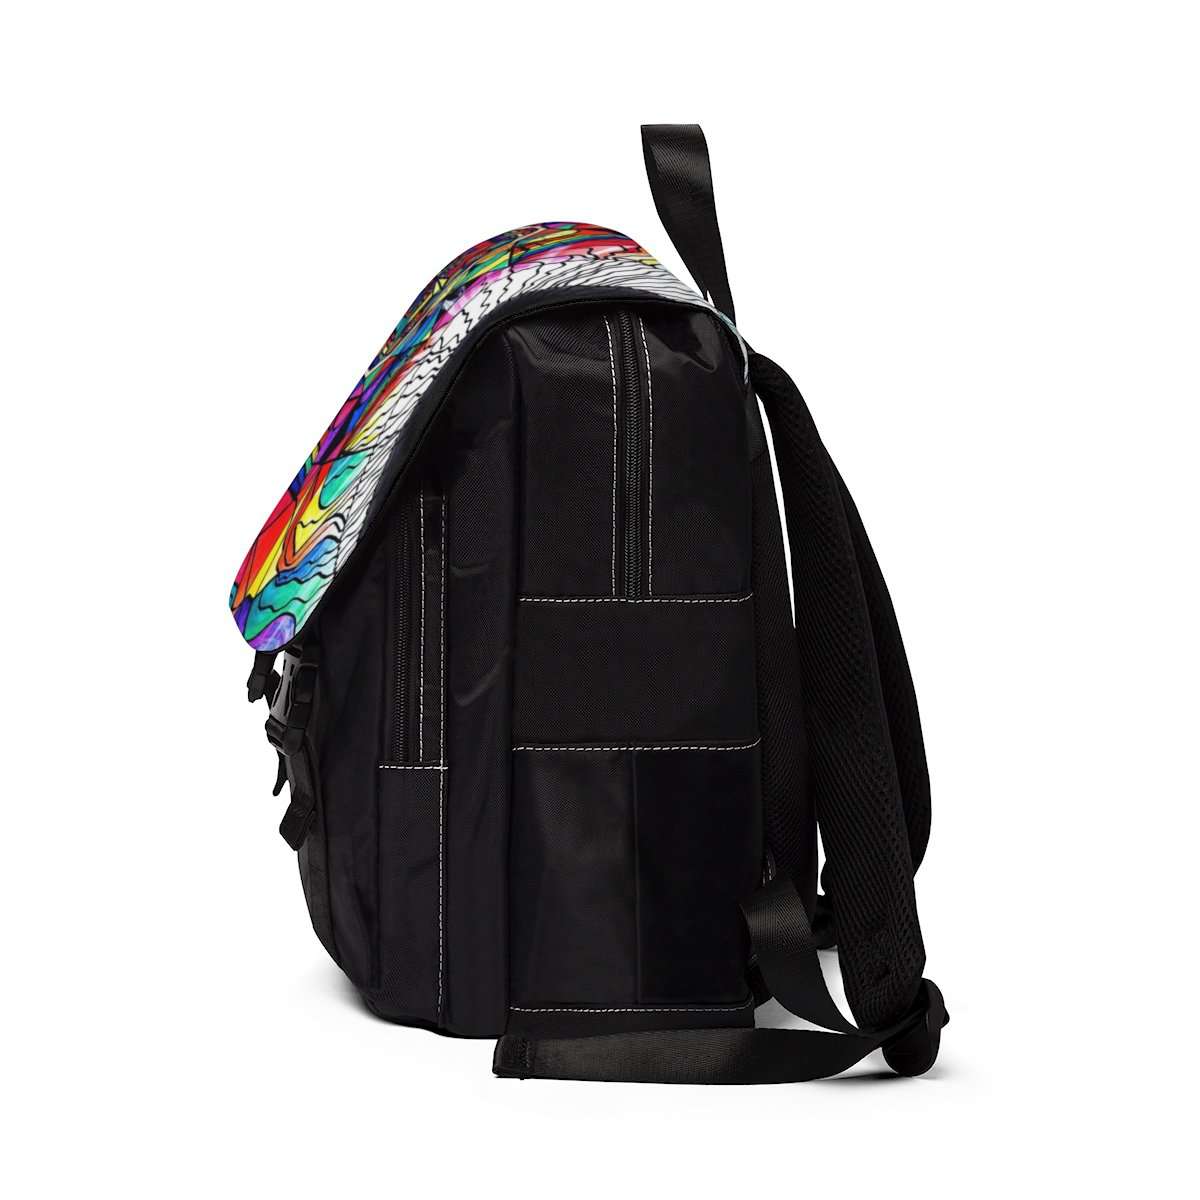 shop-the-official-online-store-of-return-to-source-unisex-casual-shoulder-backpack-on-sale_2.jpg